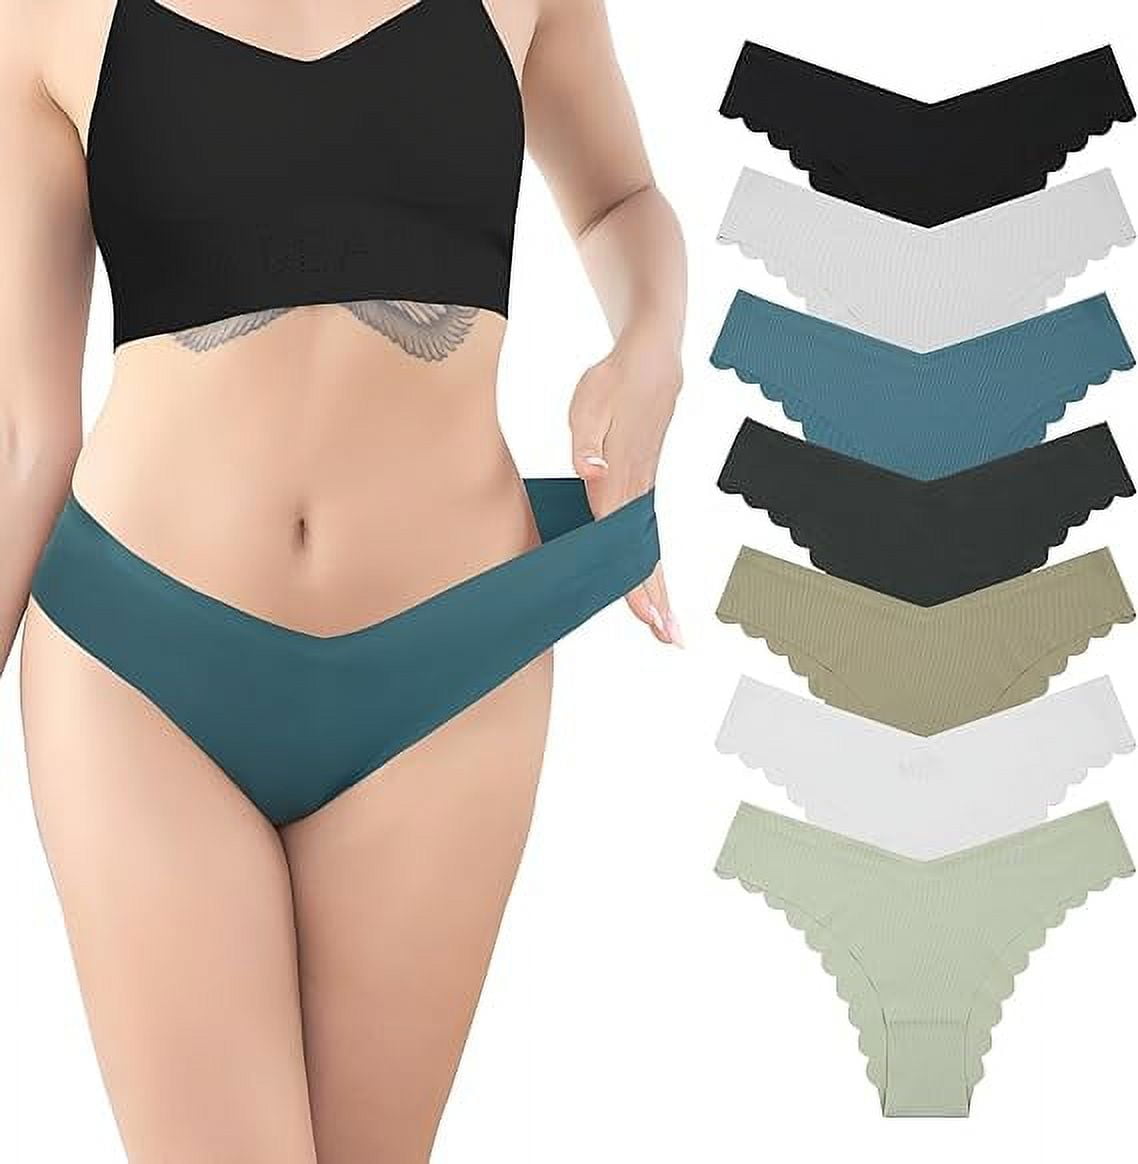  LEVAO 3 Pack Sexy Underwear For Women Invisible